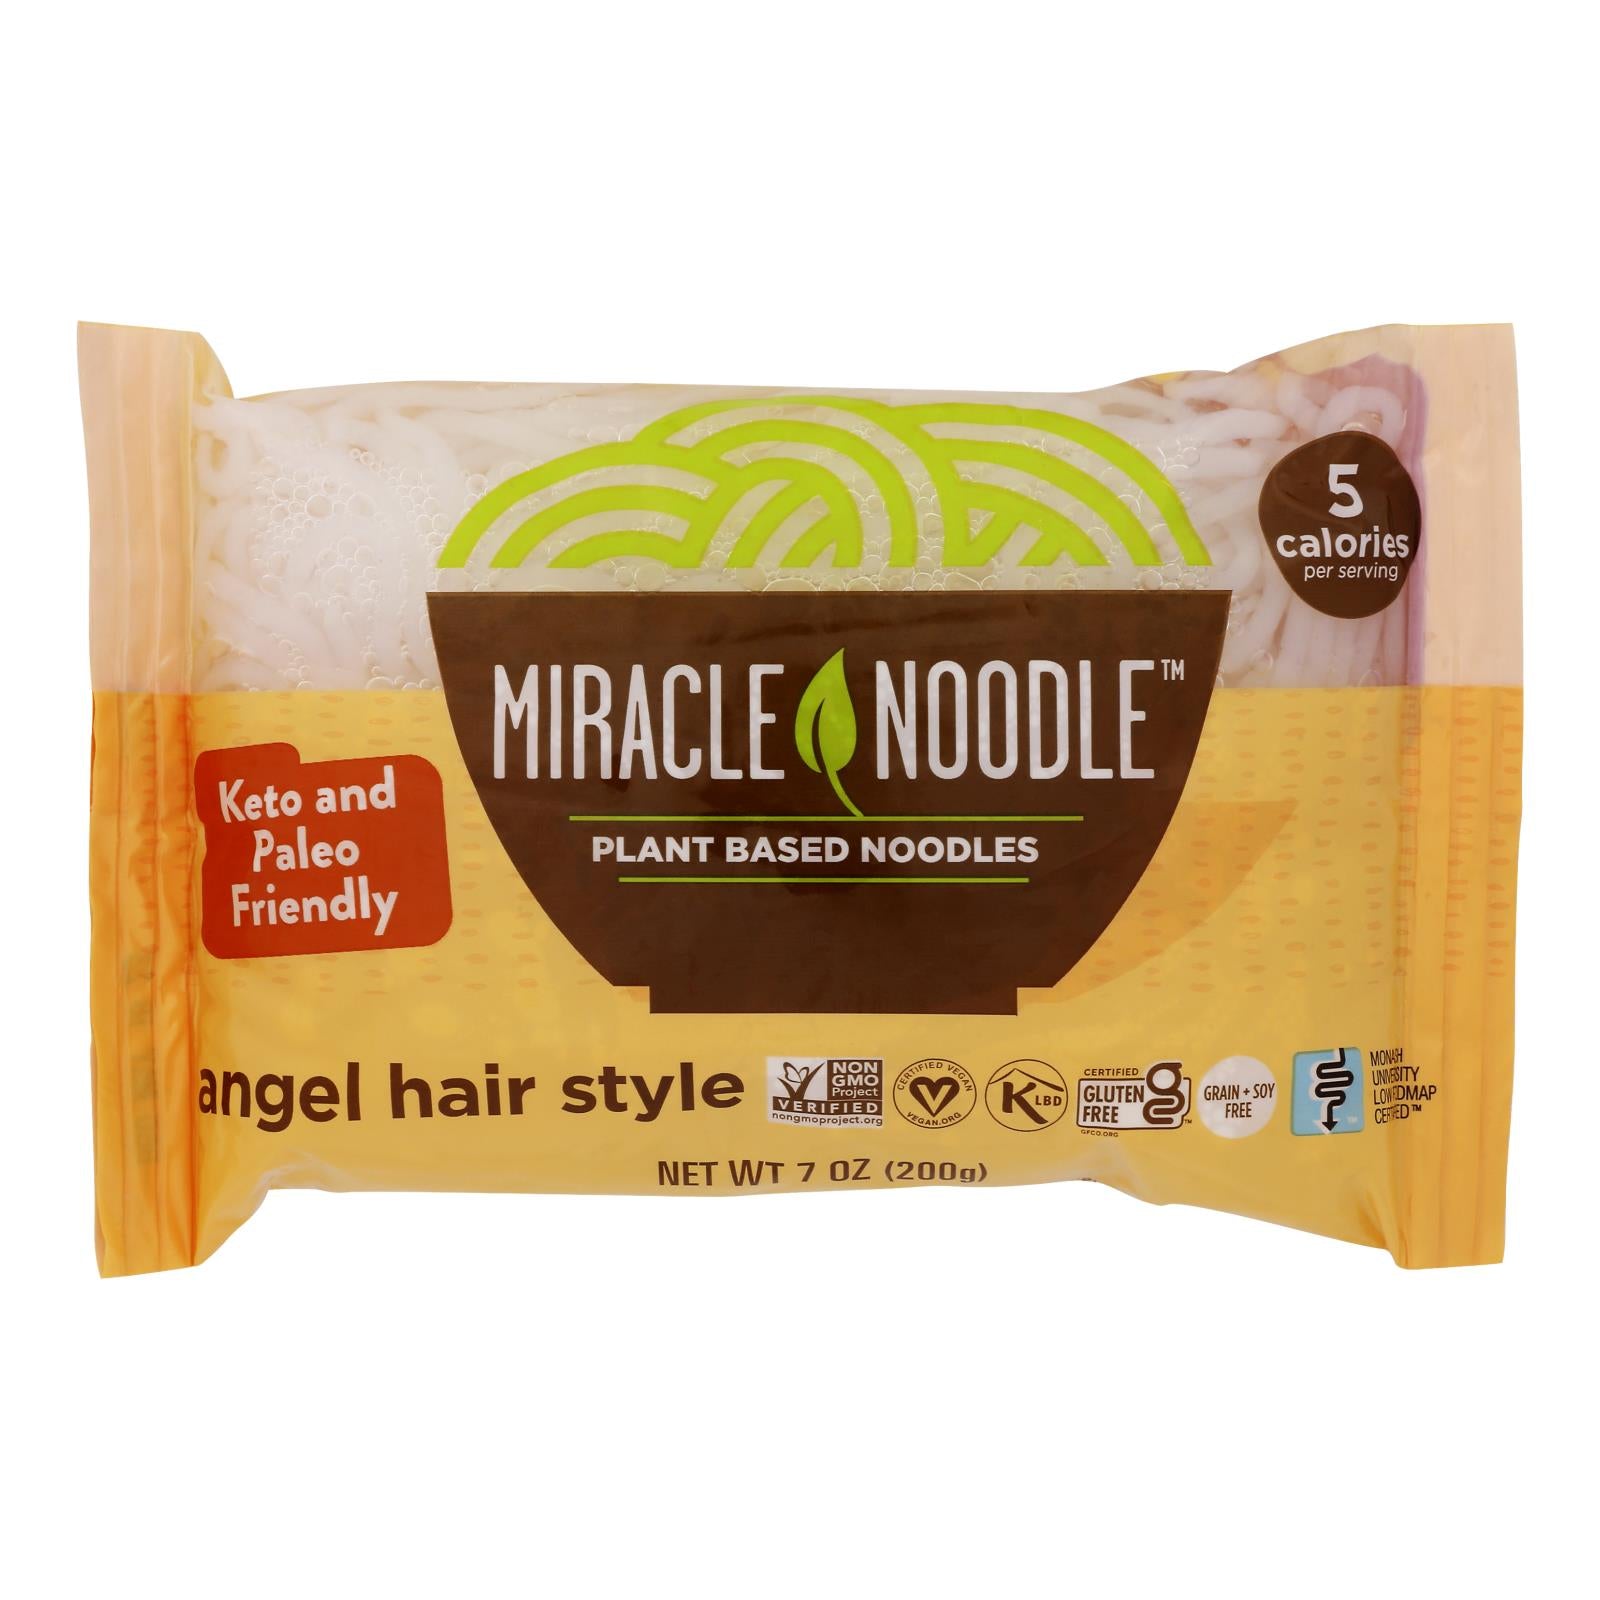 Miracle Noodle Pasta - Shirataki - Miracle Noodle - Angel Hair - 7 Oz - Case Of 6